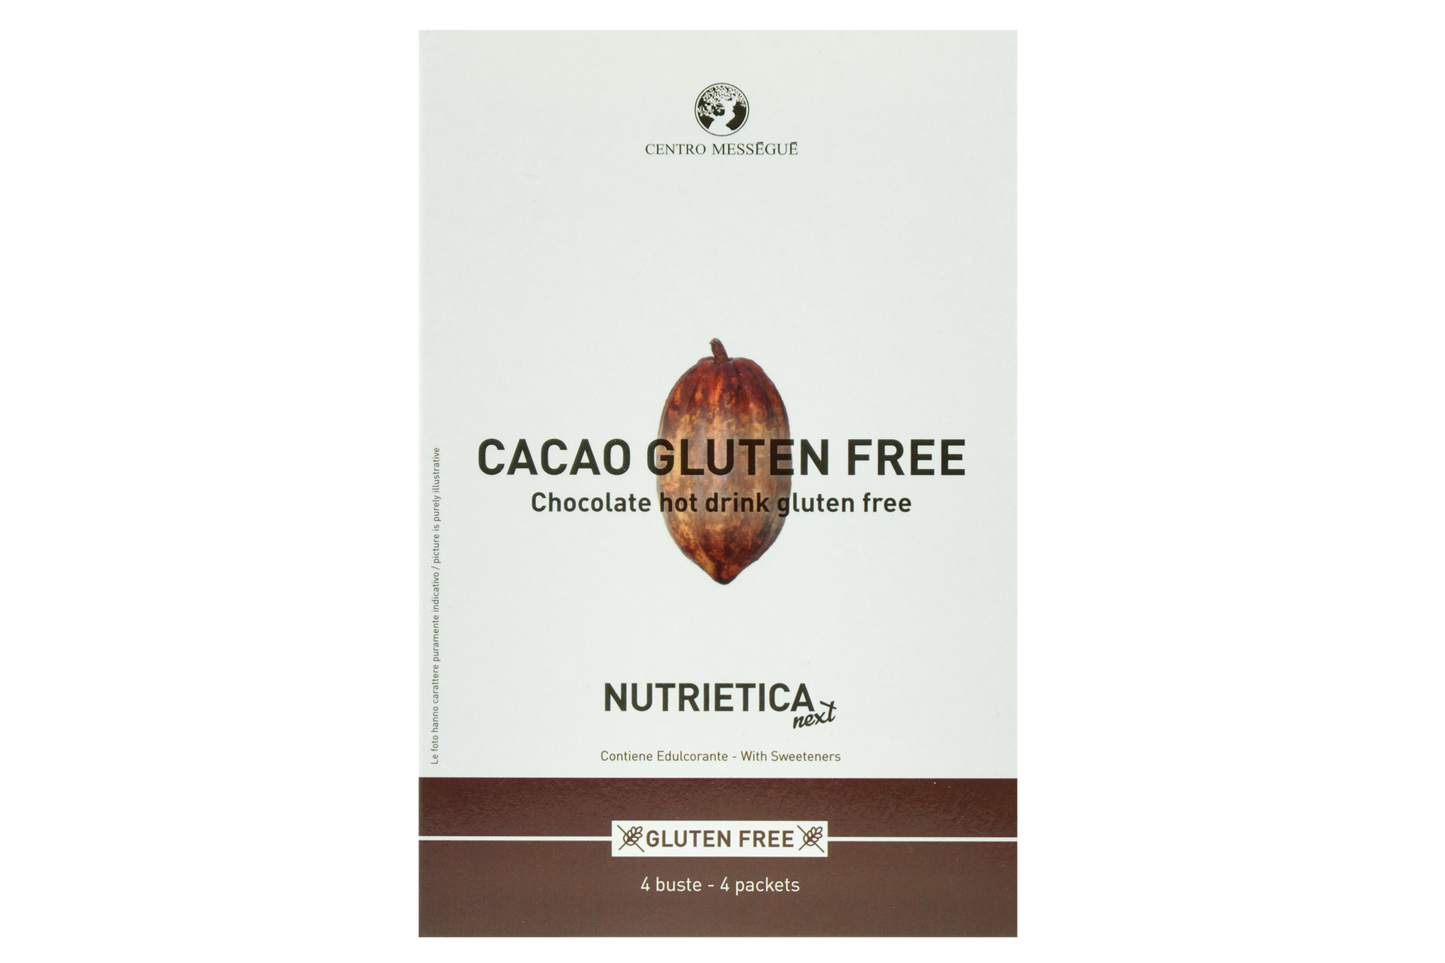 Cacao (conf. 4 buste) GLUTEN FREE